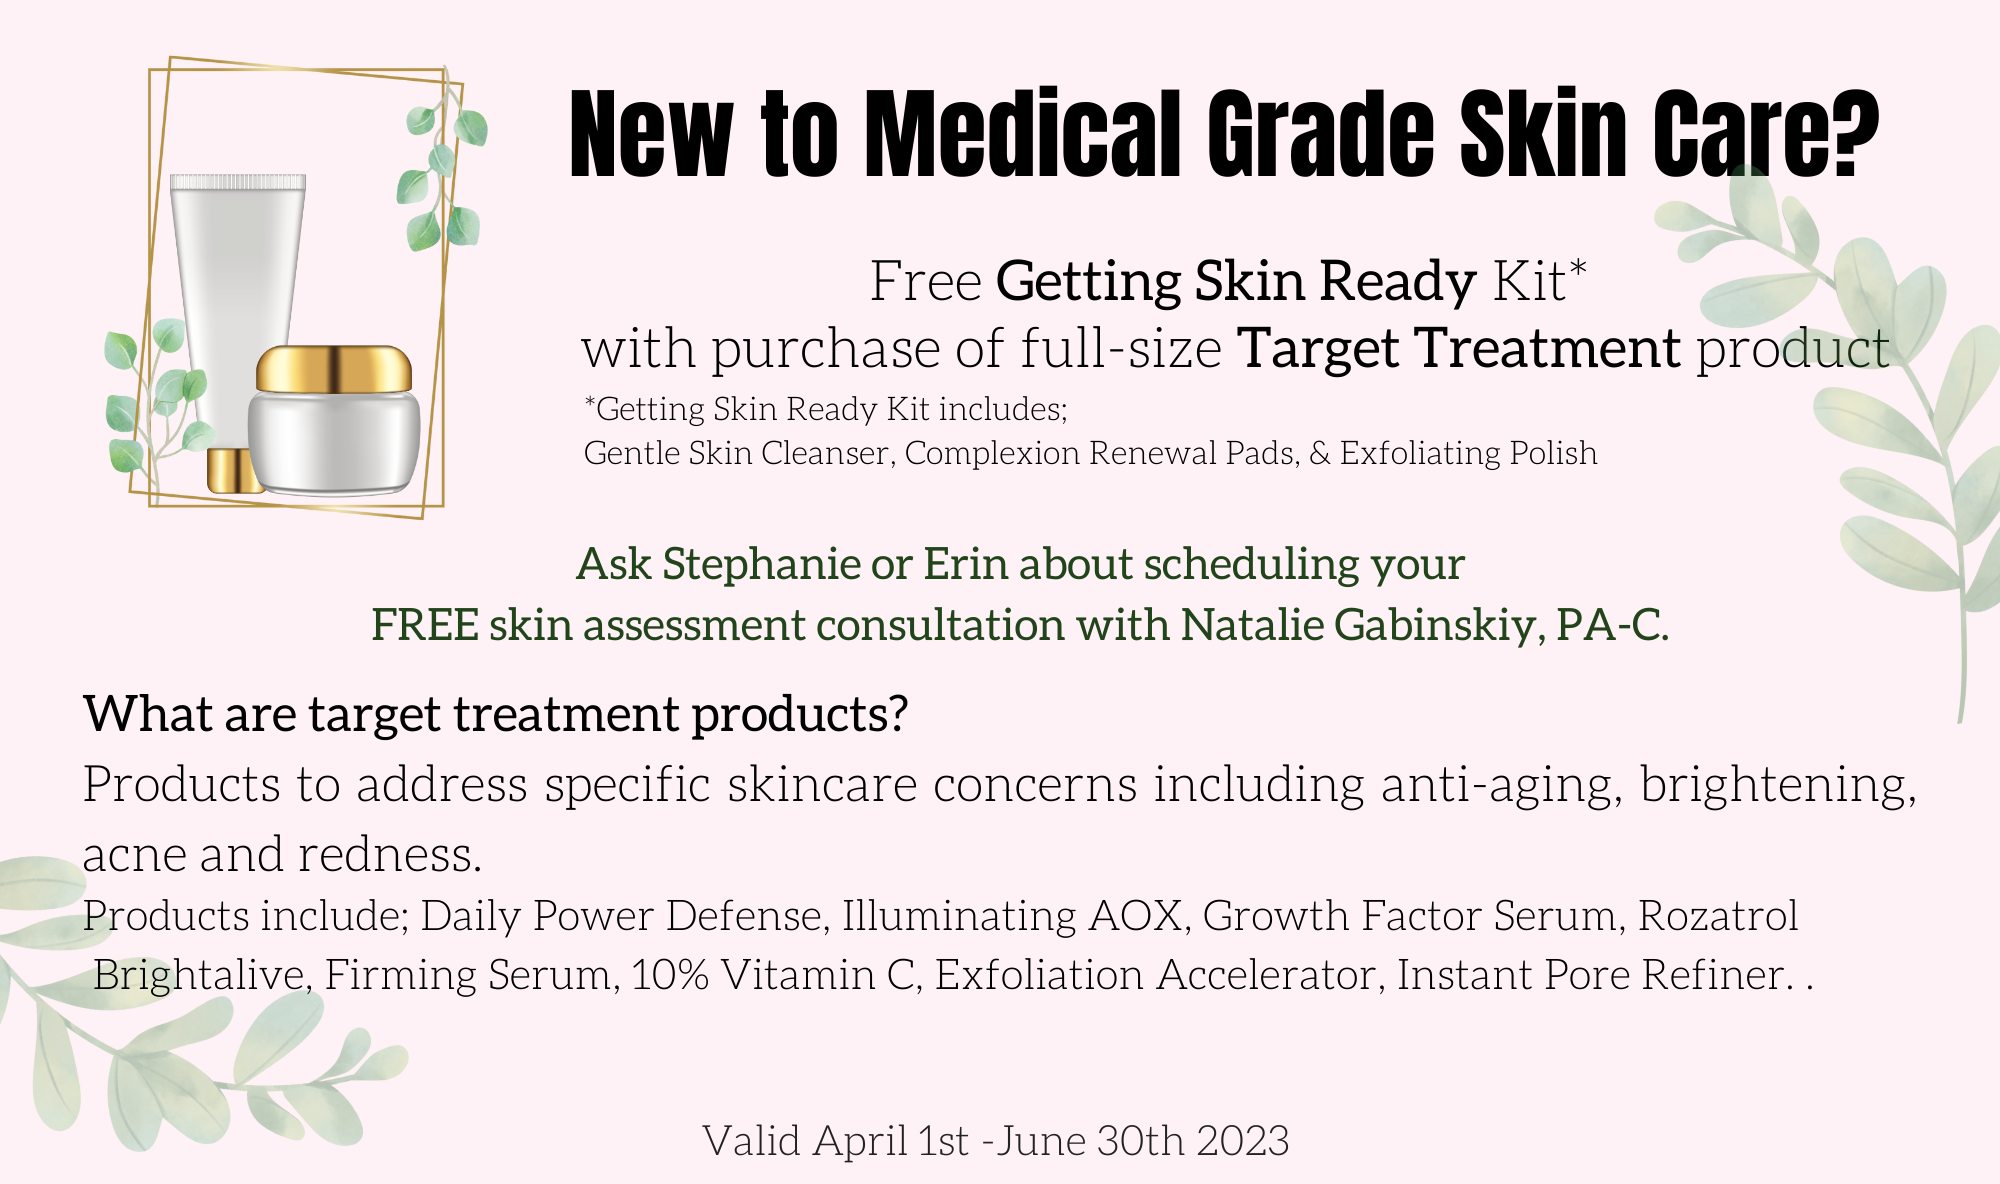 2023 Promo: Skin Ready Kit w/ Purchase of Target Treatment Product